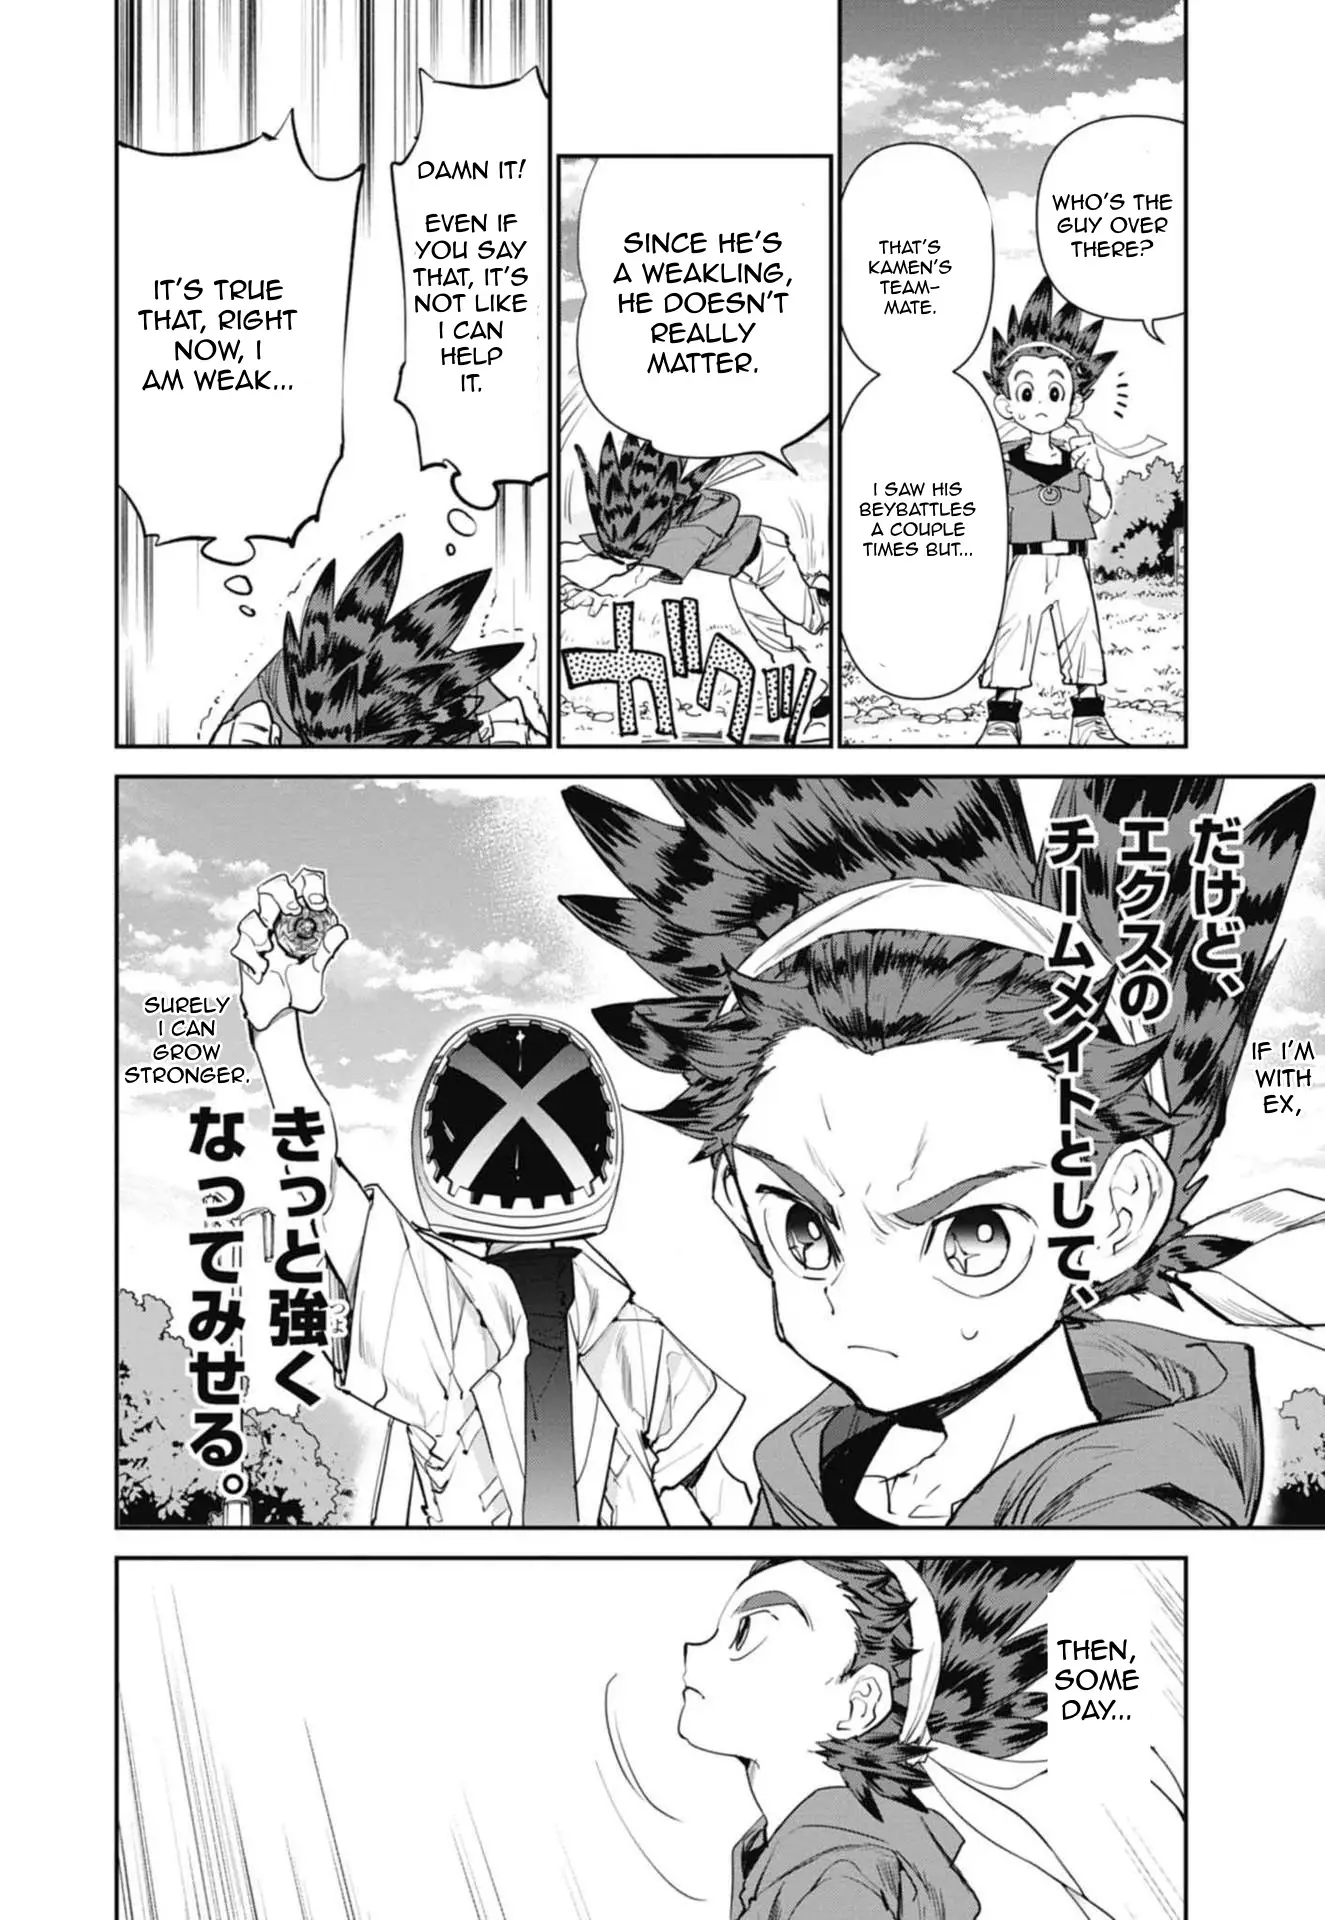 Beyblade X - 2 page 5-1fc6d185